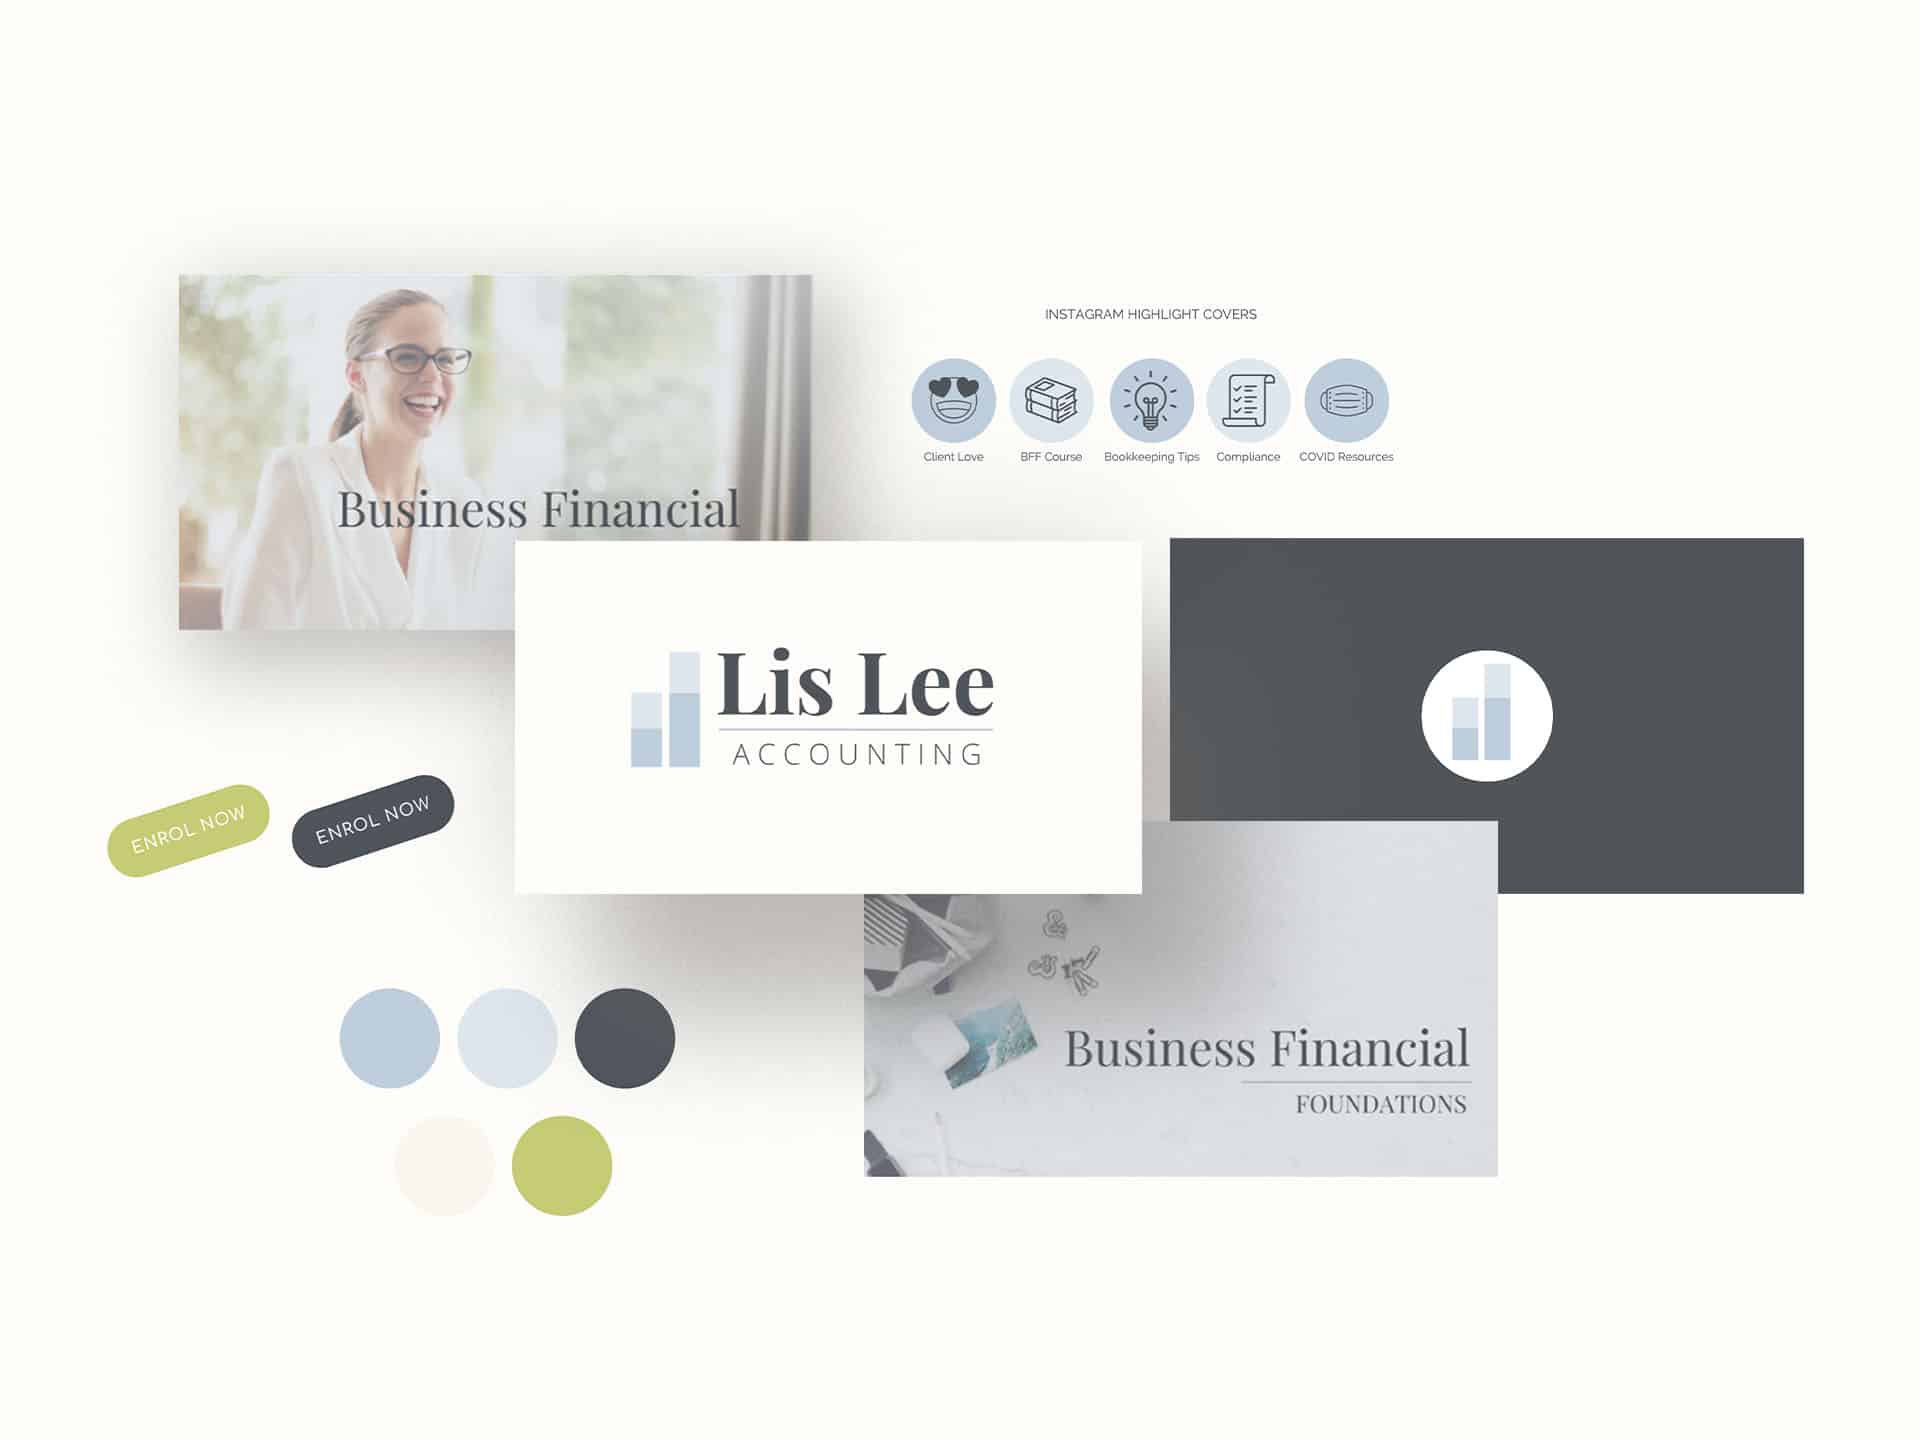 Visual brand assets for Lis Lee Accounting, logo, colour palette, icons and Thinkific course cover